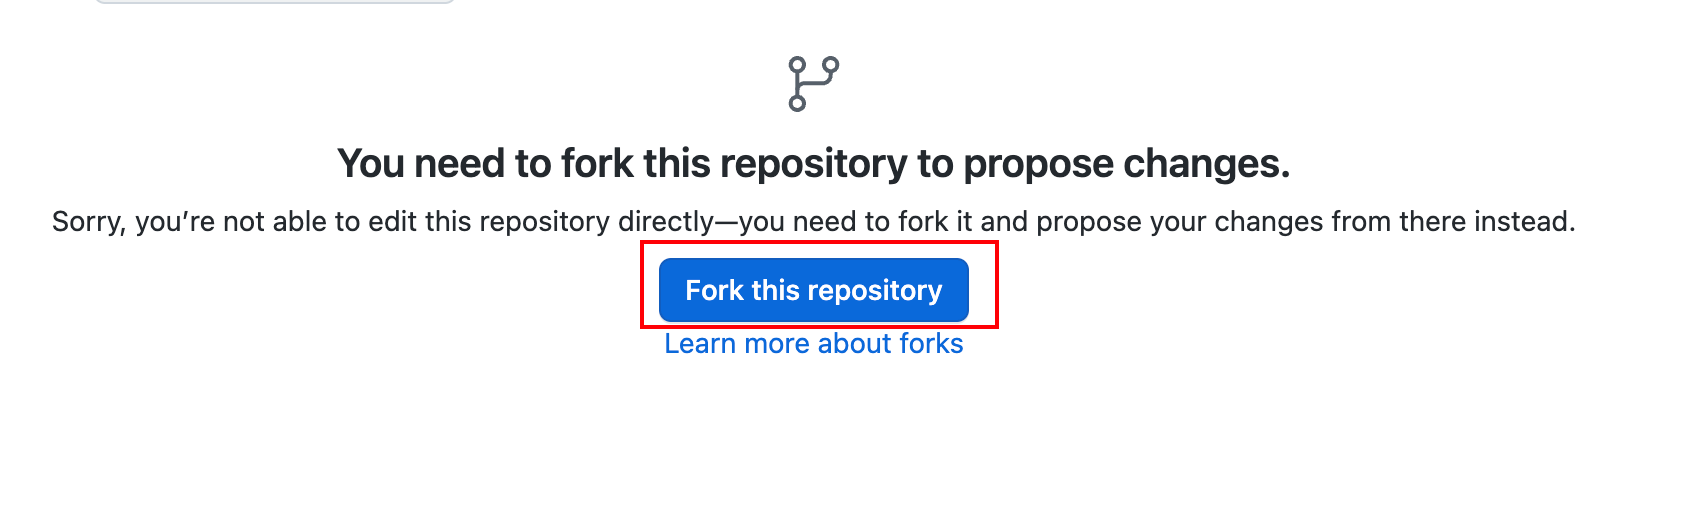 Fork this repository